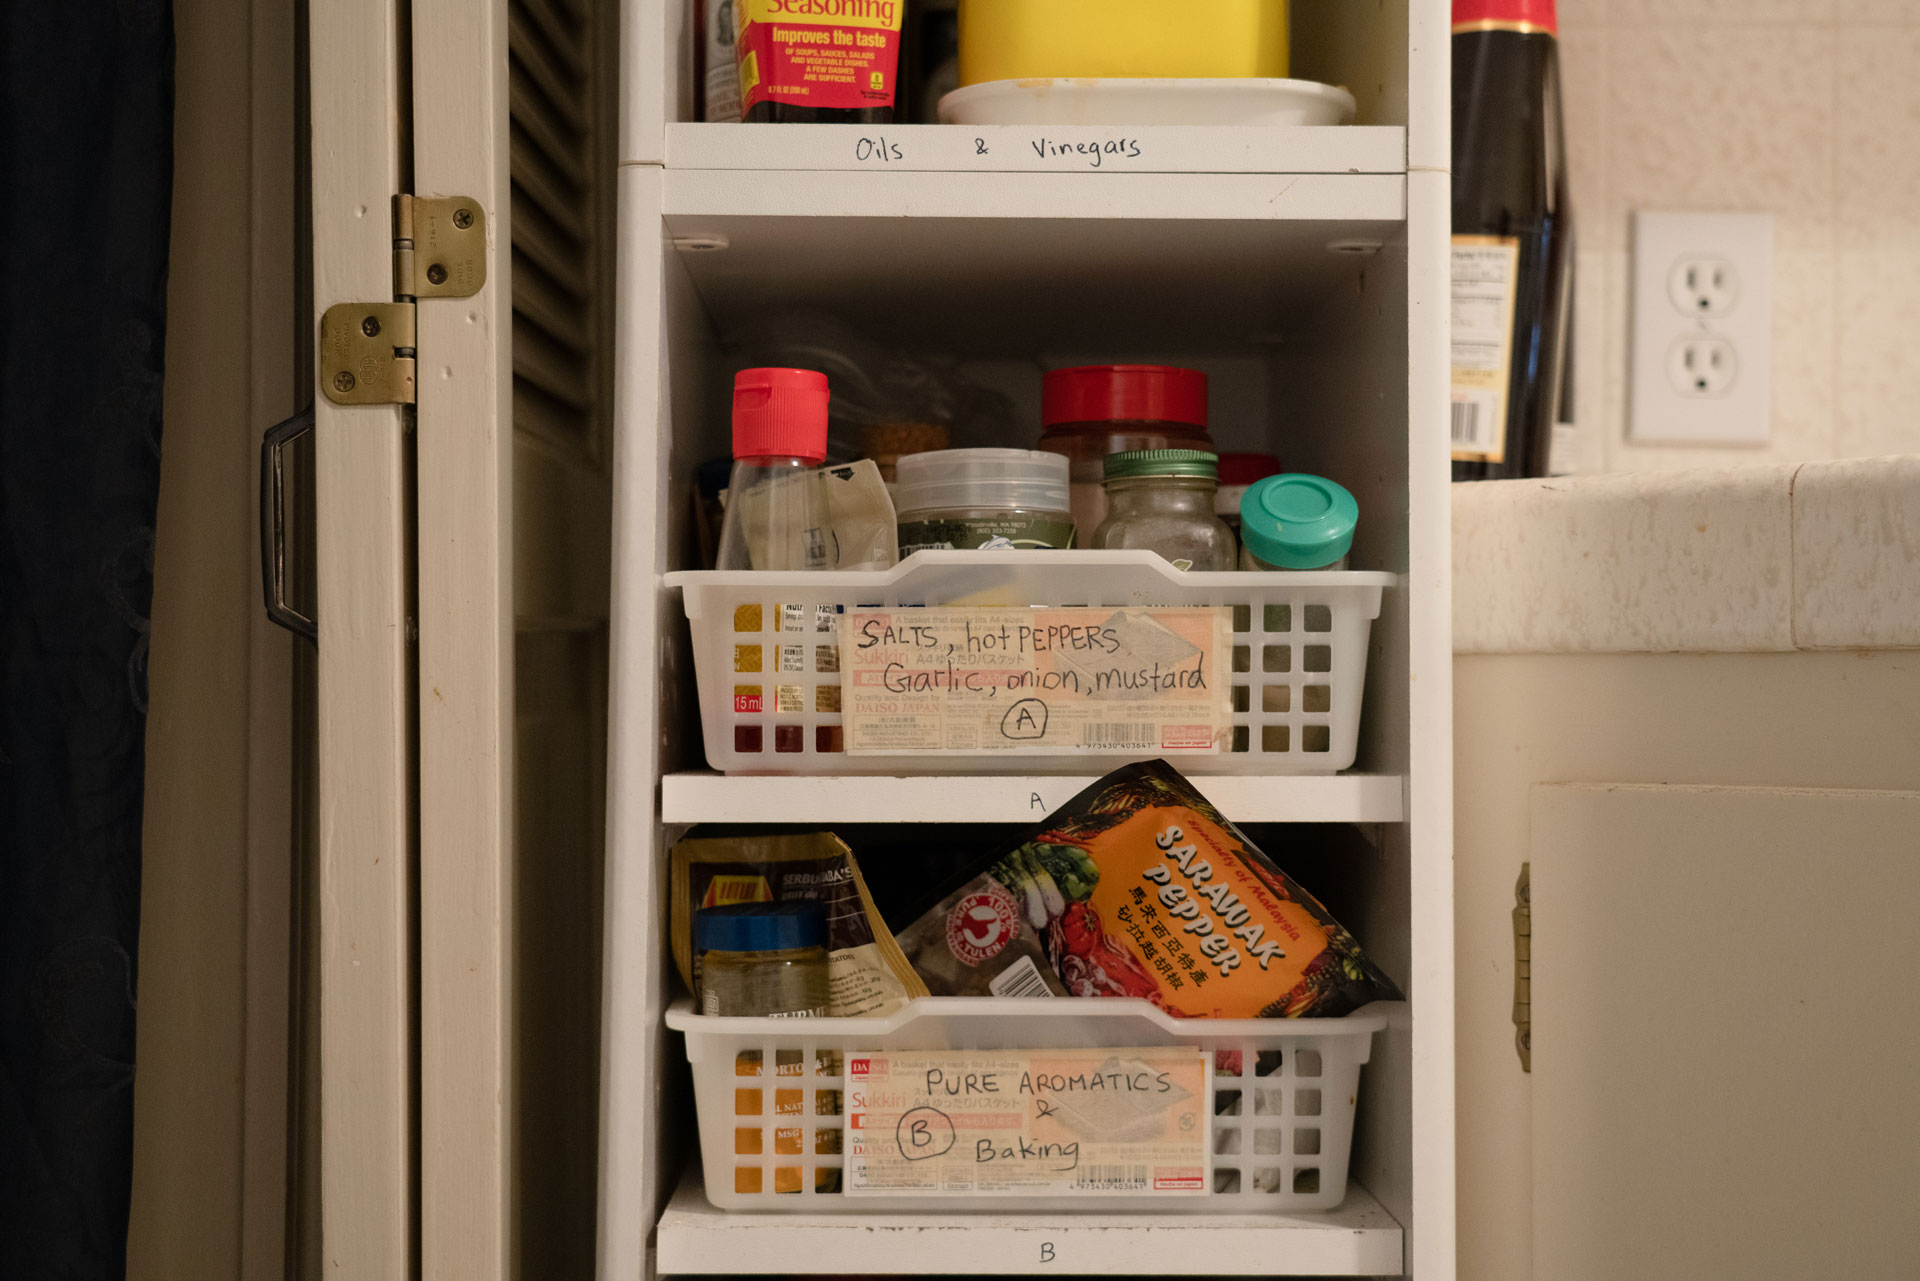 Labeled baskets of spices sit in a white shelf in the kitchen.